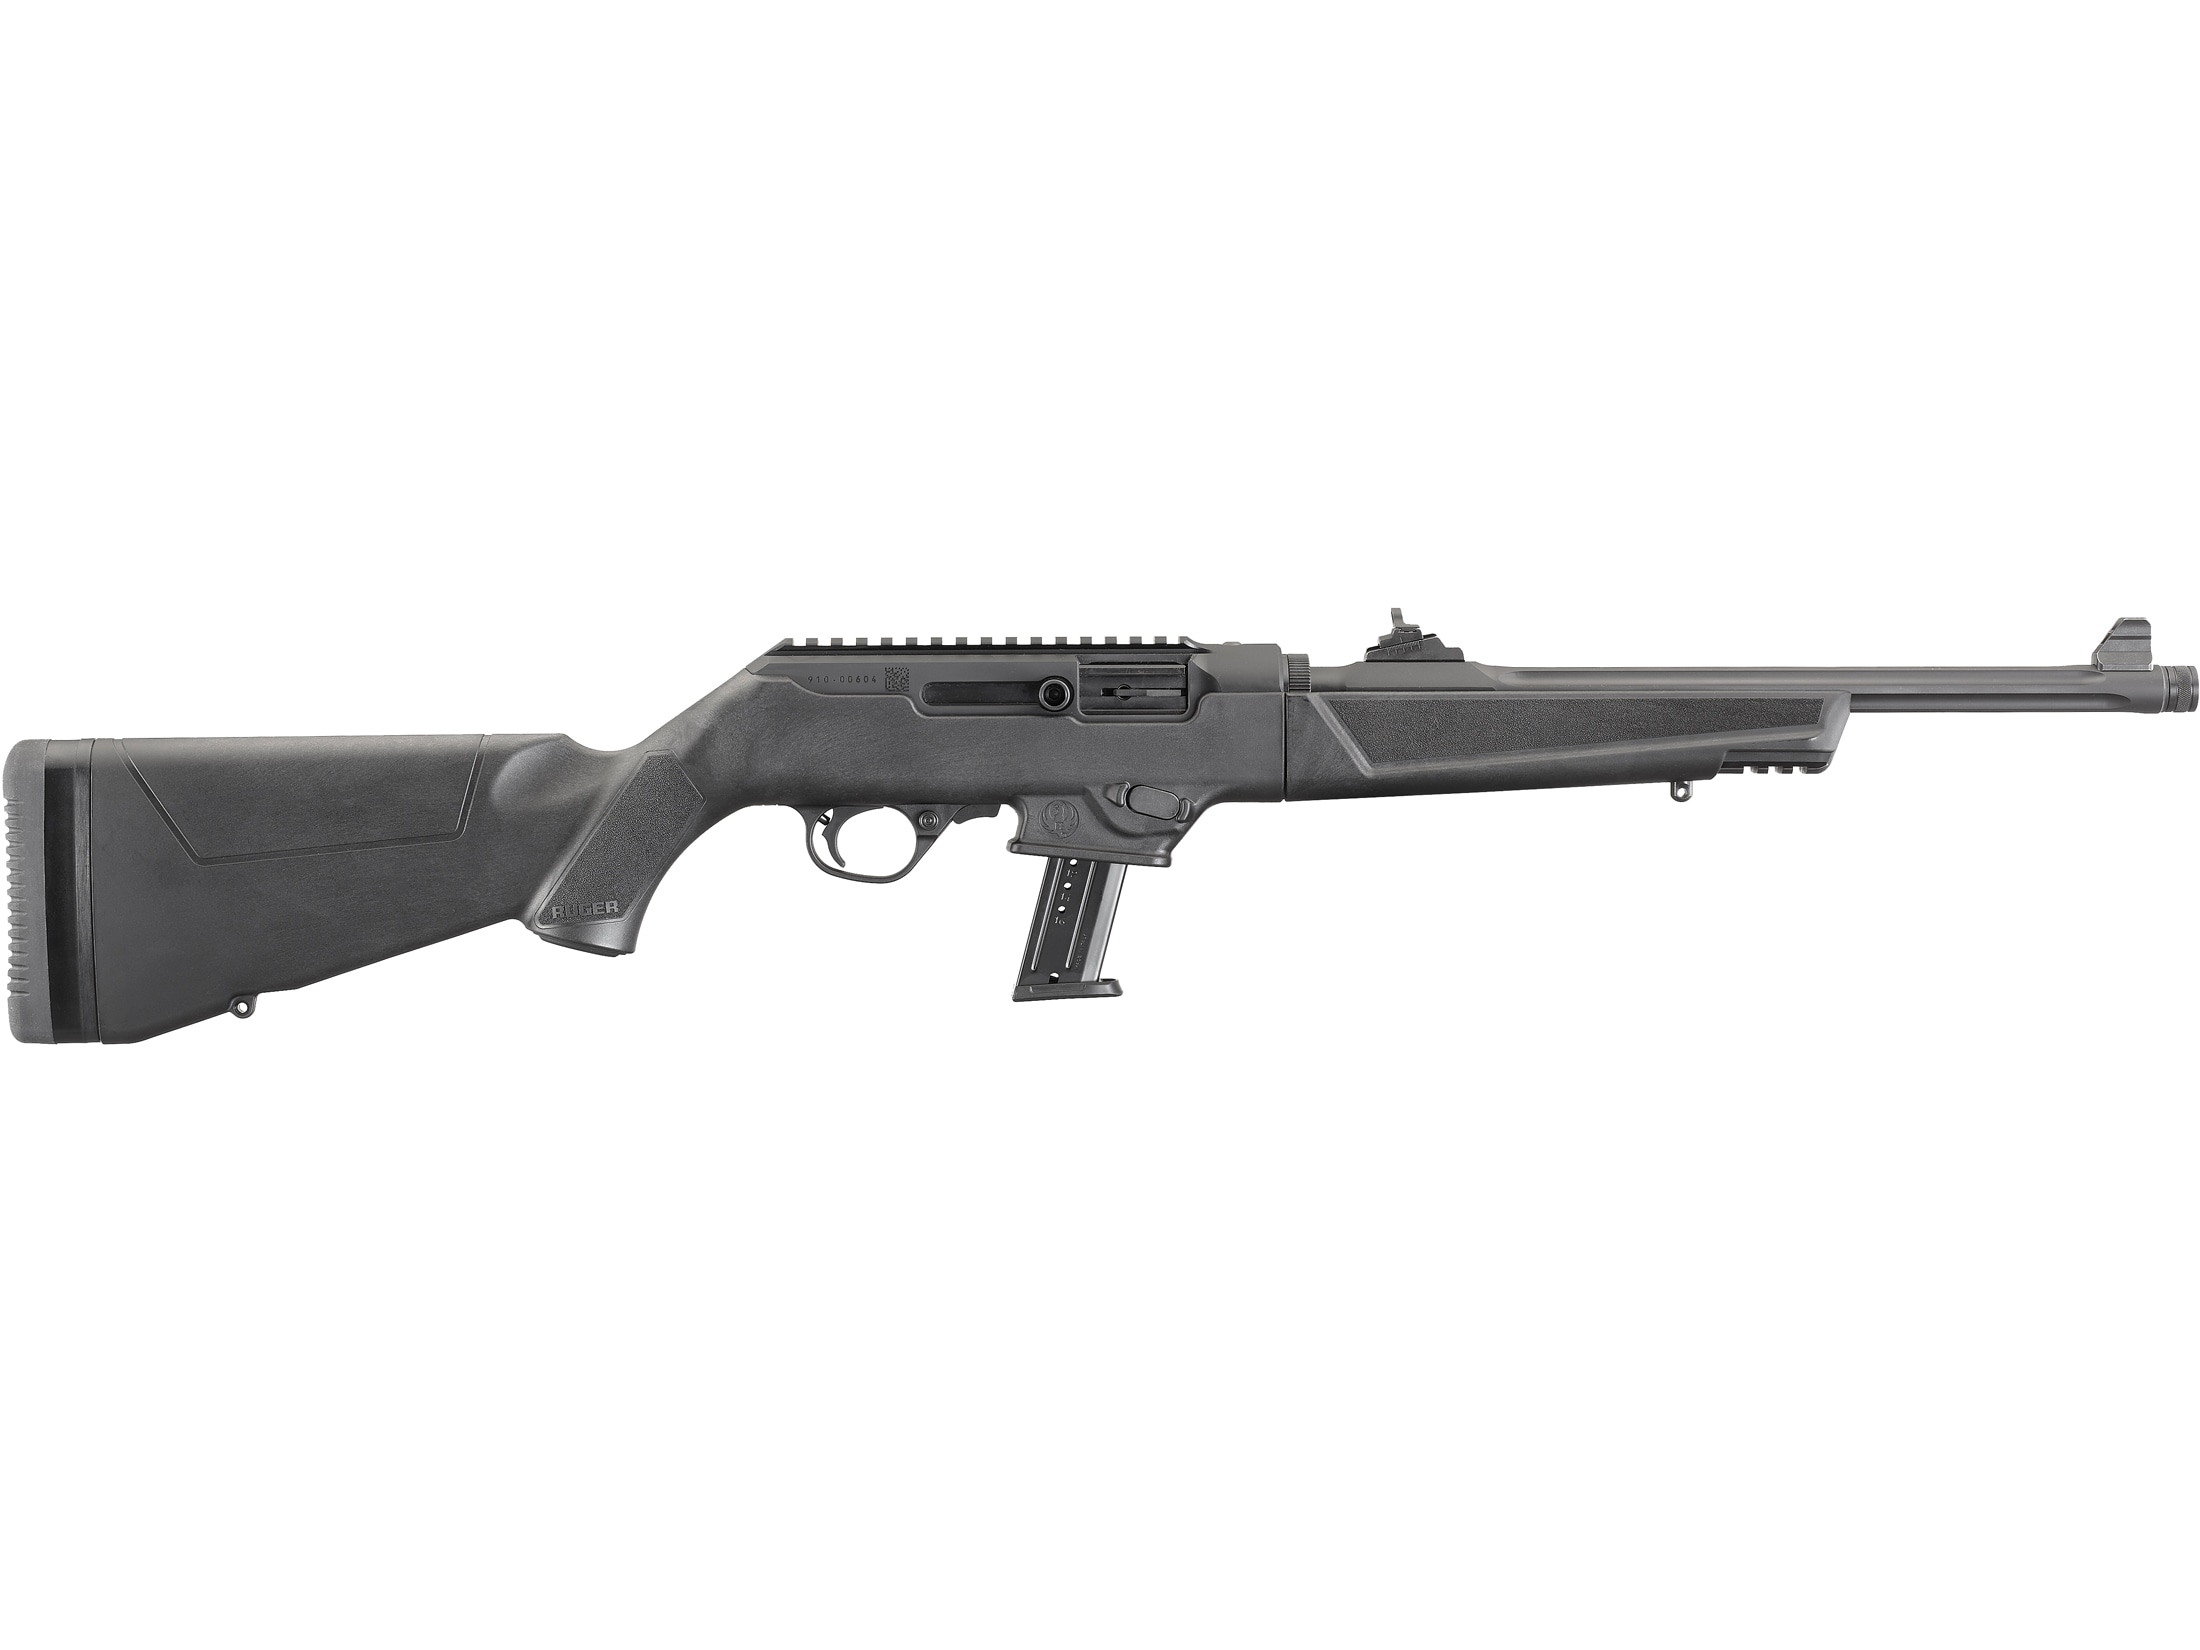 Ruger PC Carbine Semi-Automatic Centerfire Rifle 9mm Luger 16.12.